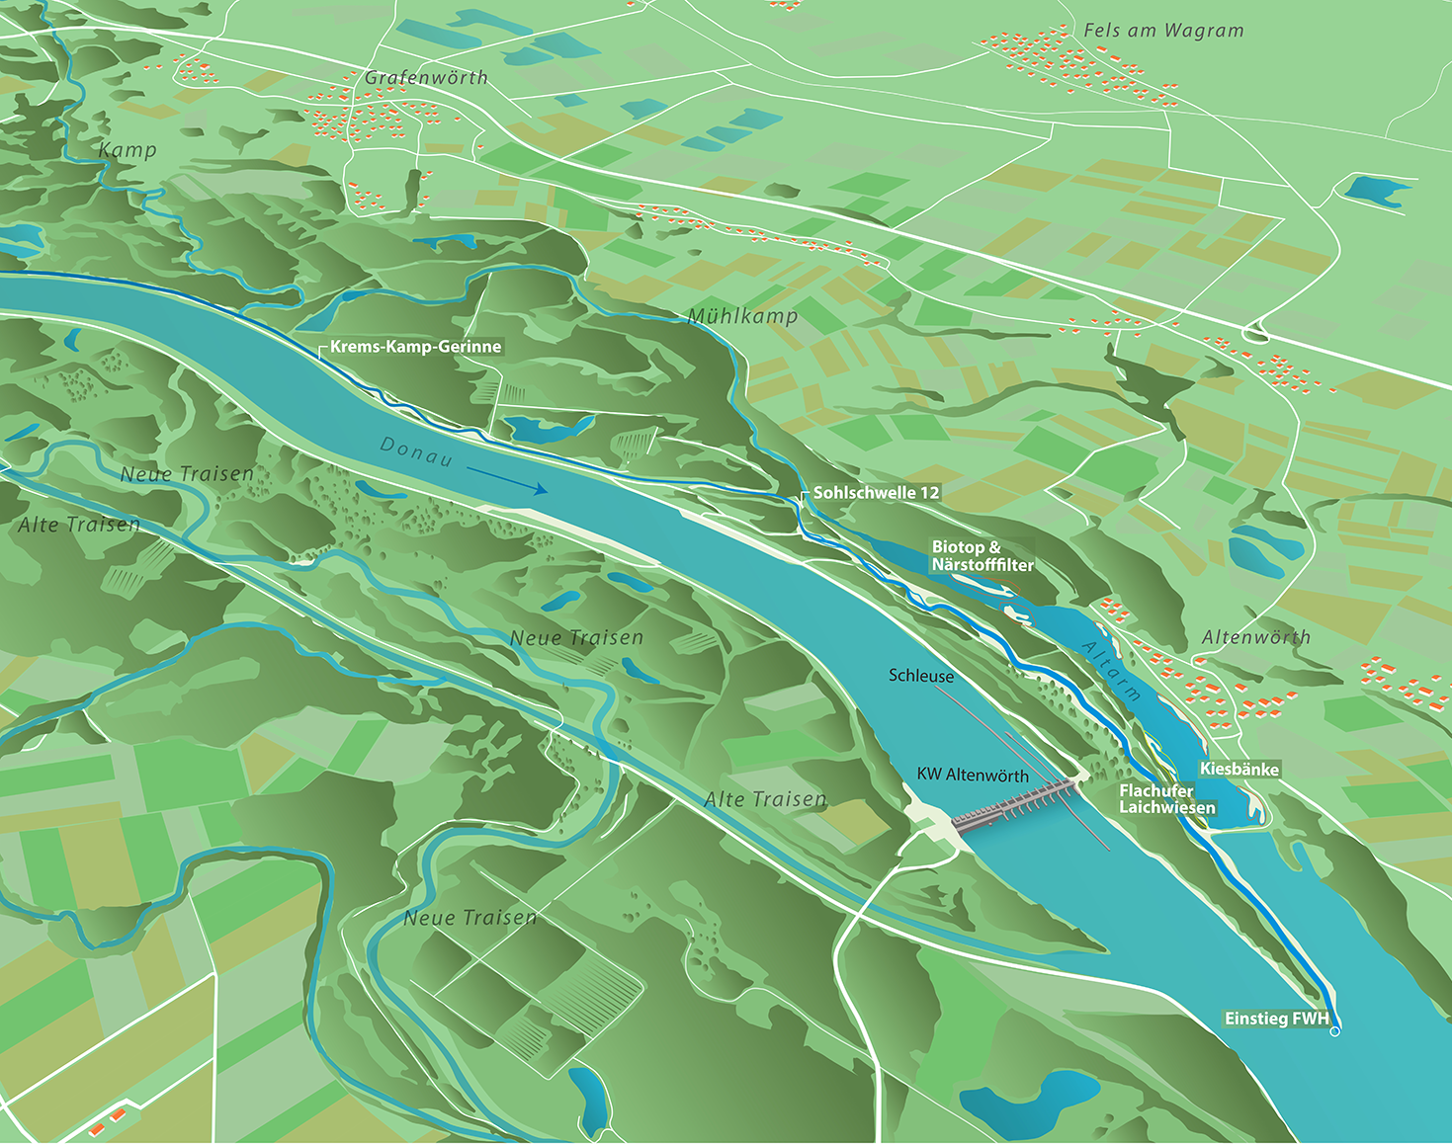 The stylized map shows the project area of LIFE Network Danube Plus.